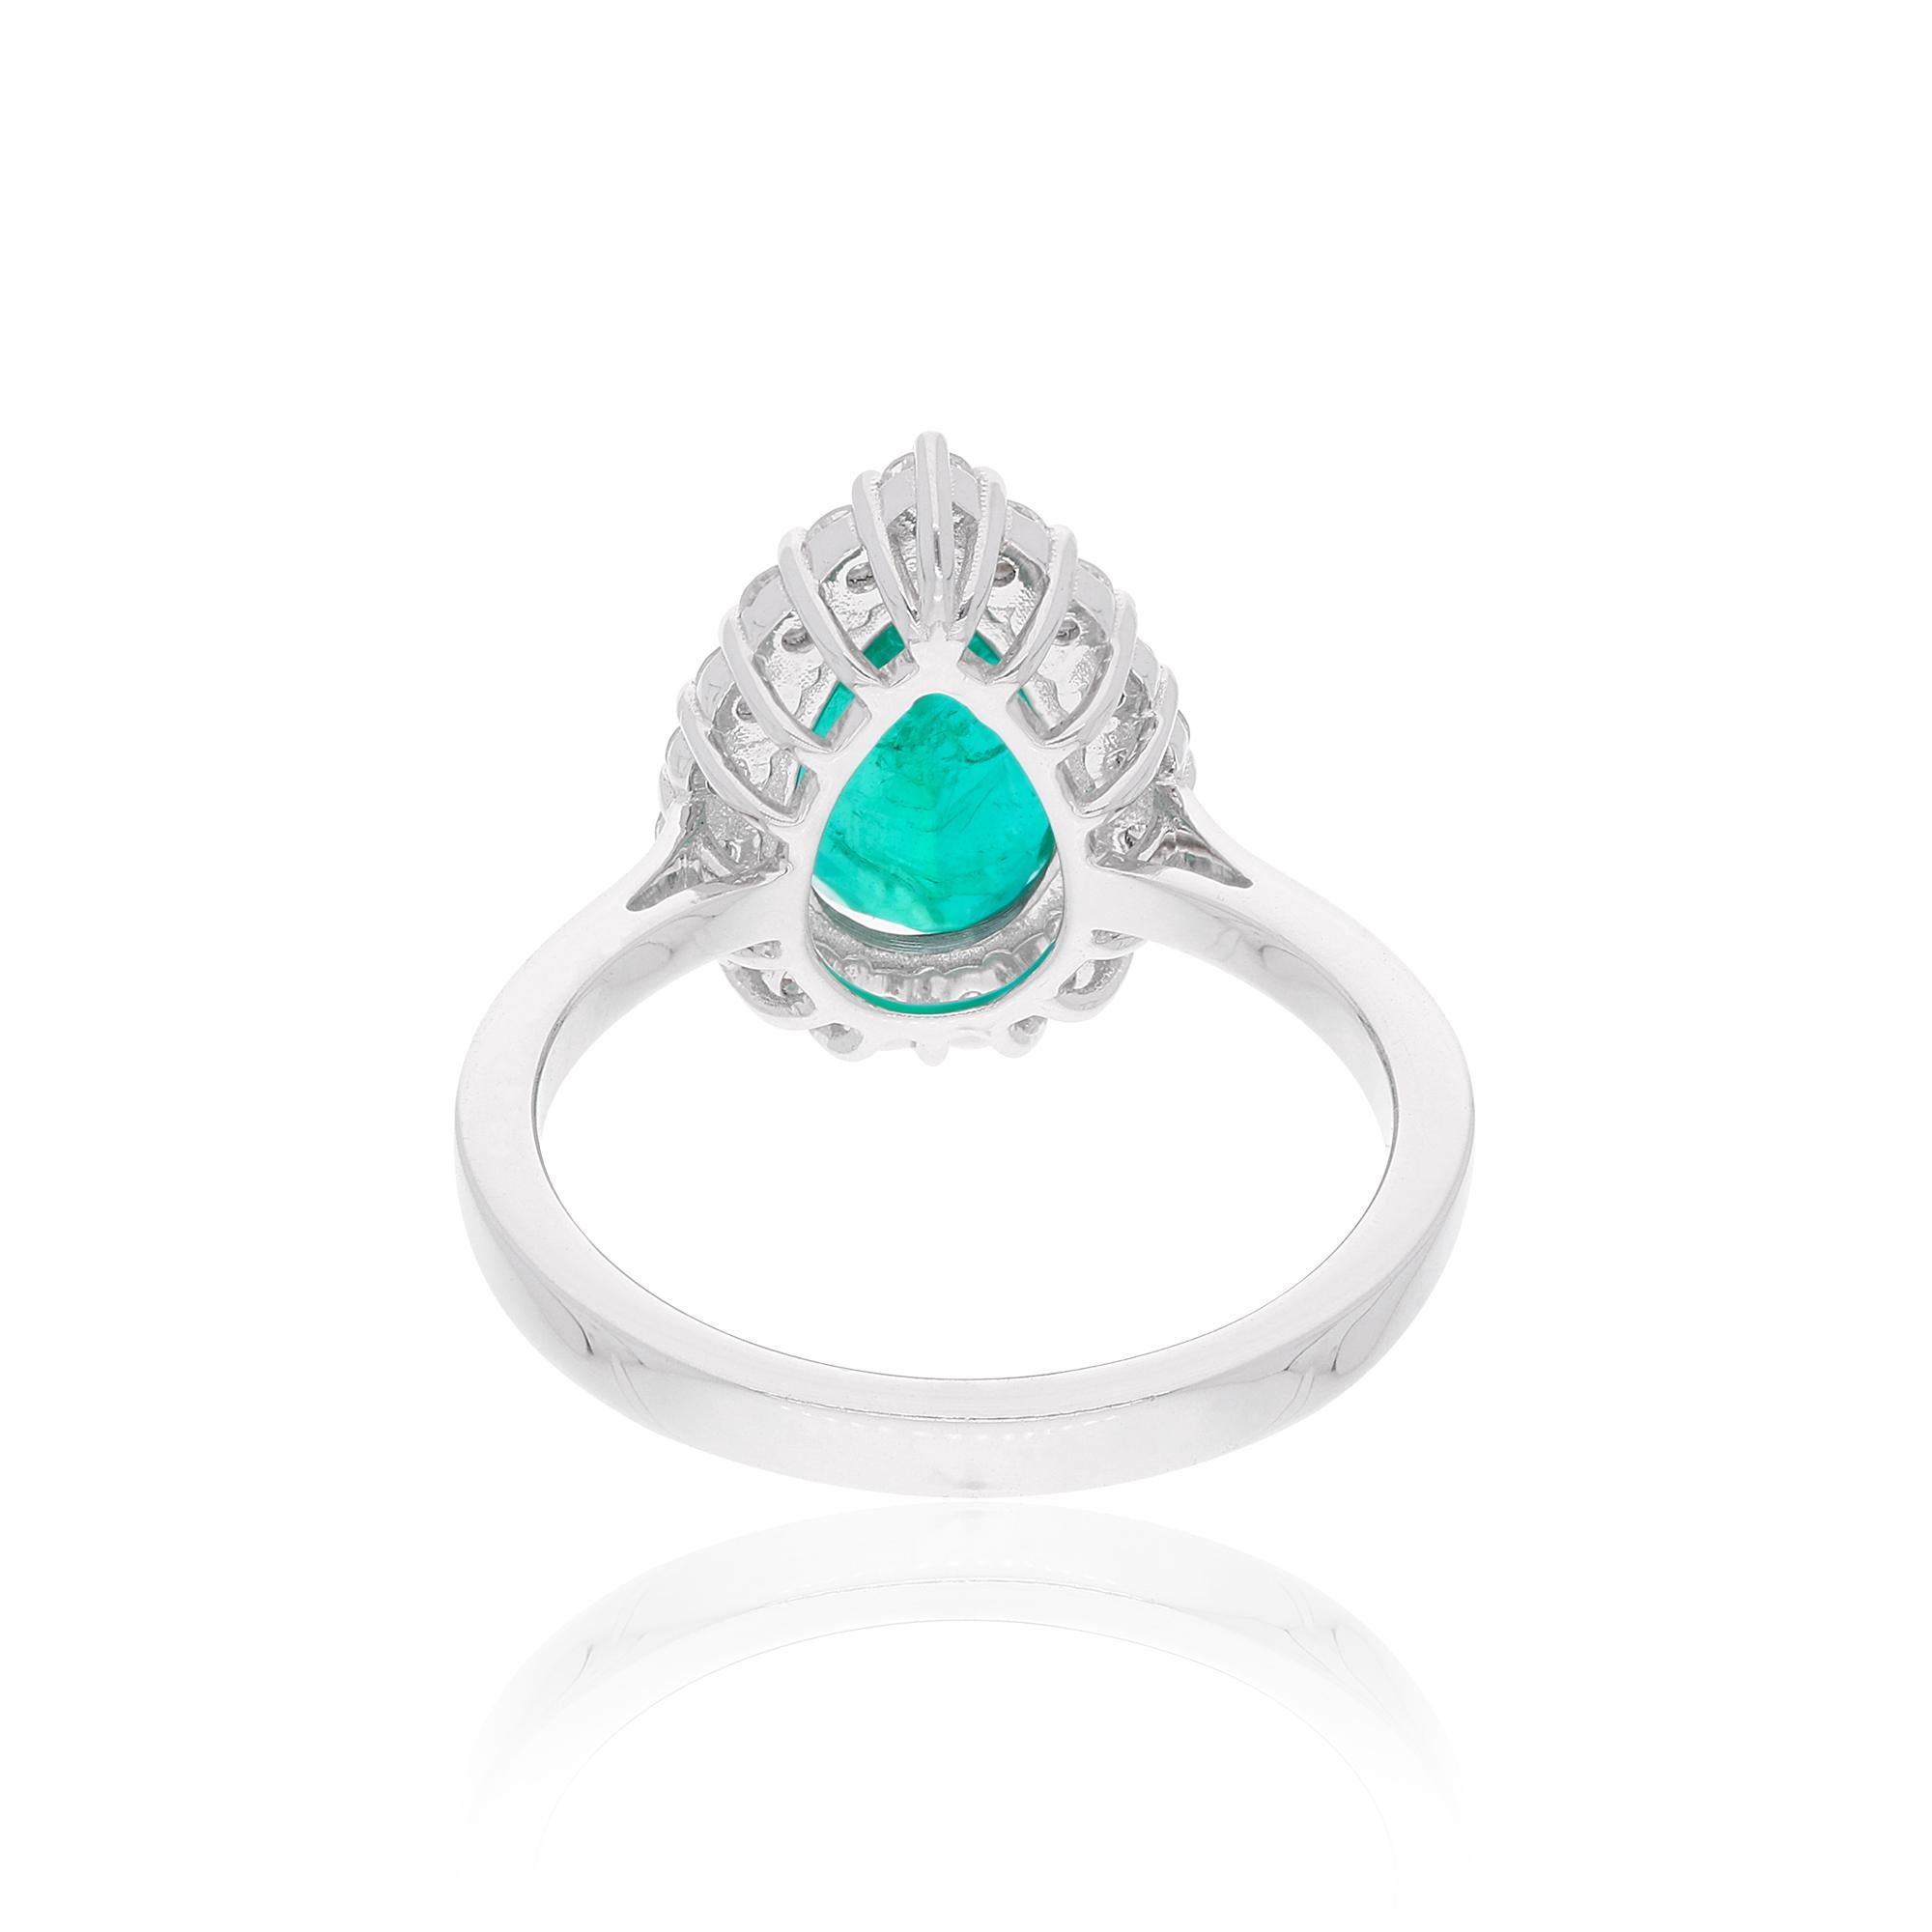 Women's Pear Natural Emerald Gemstone Cocktail Ring Diamond 18 Karat White Gold Jewelry For Sale